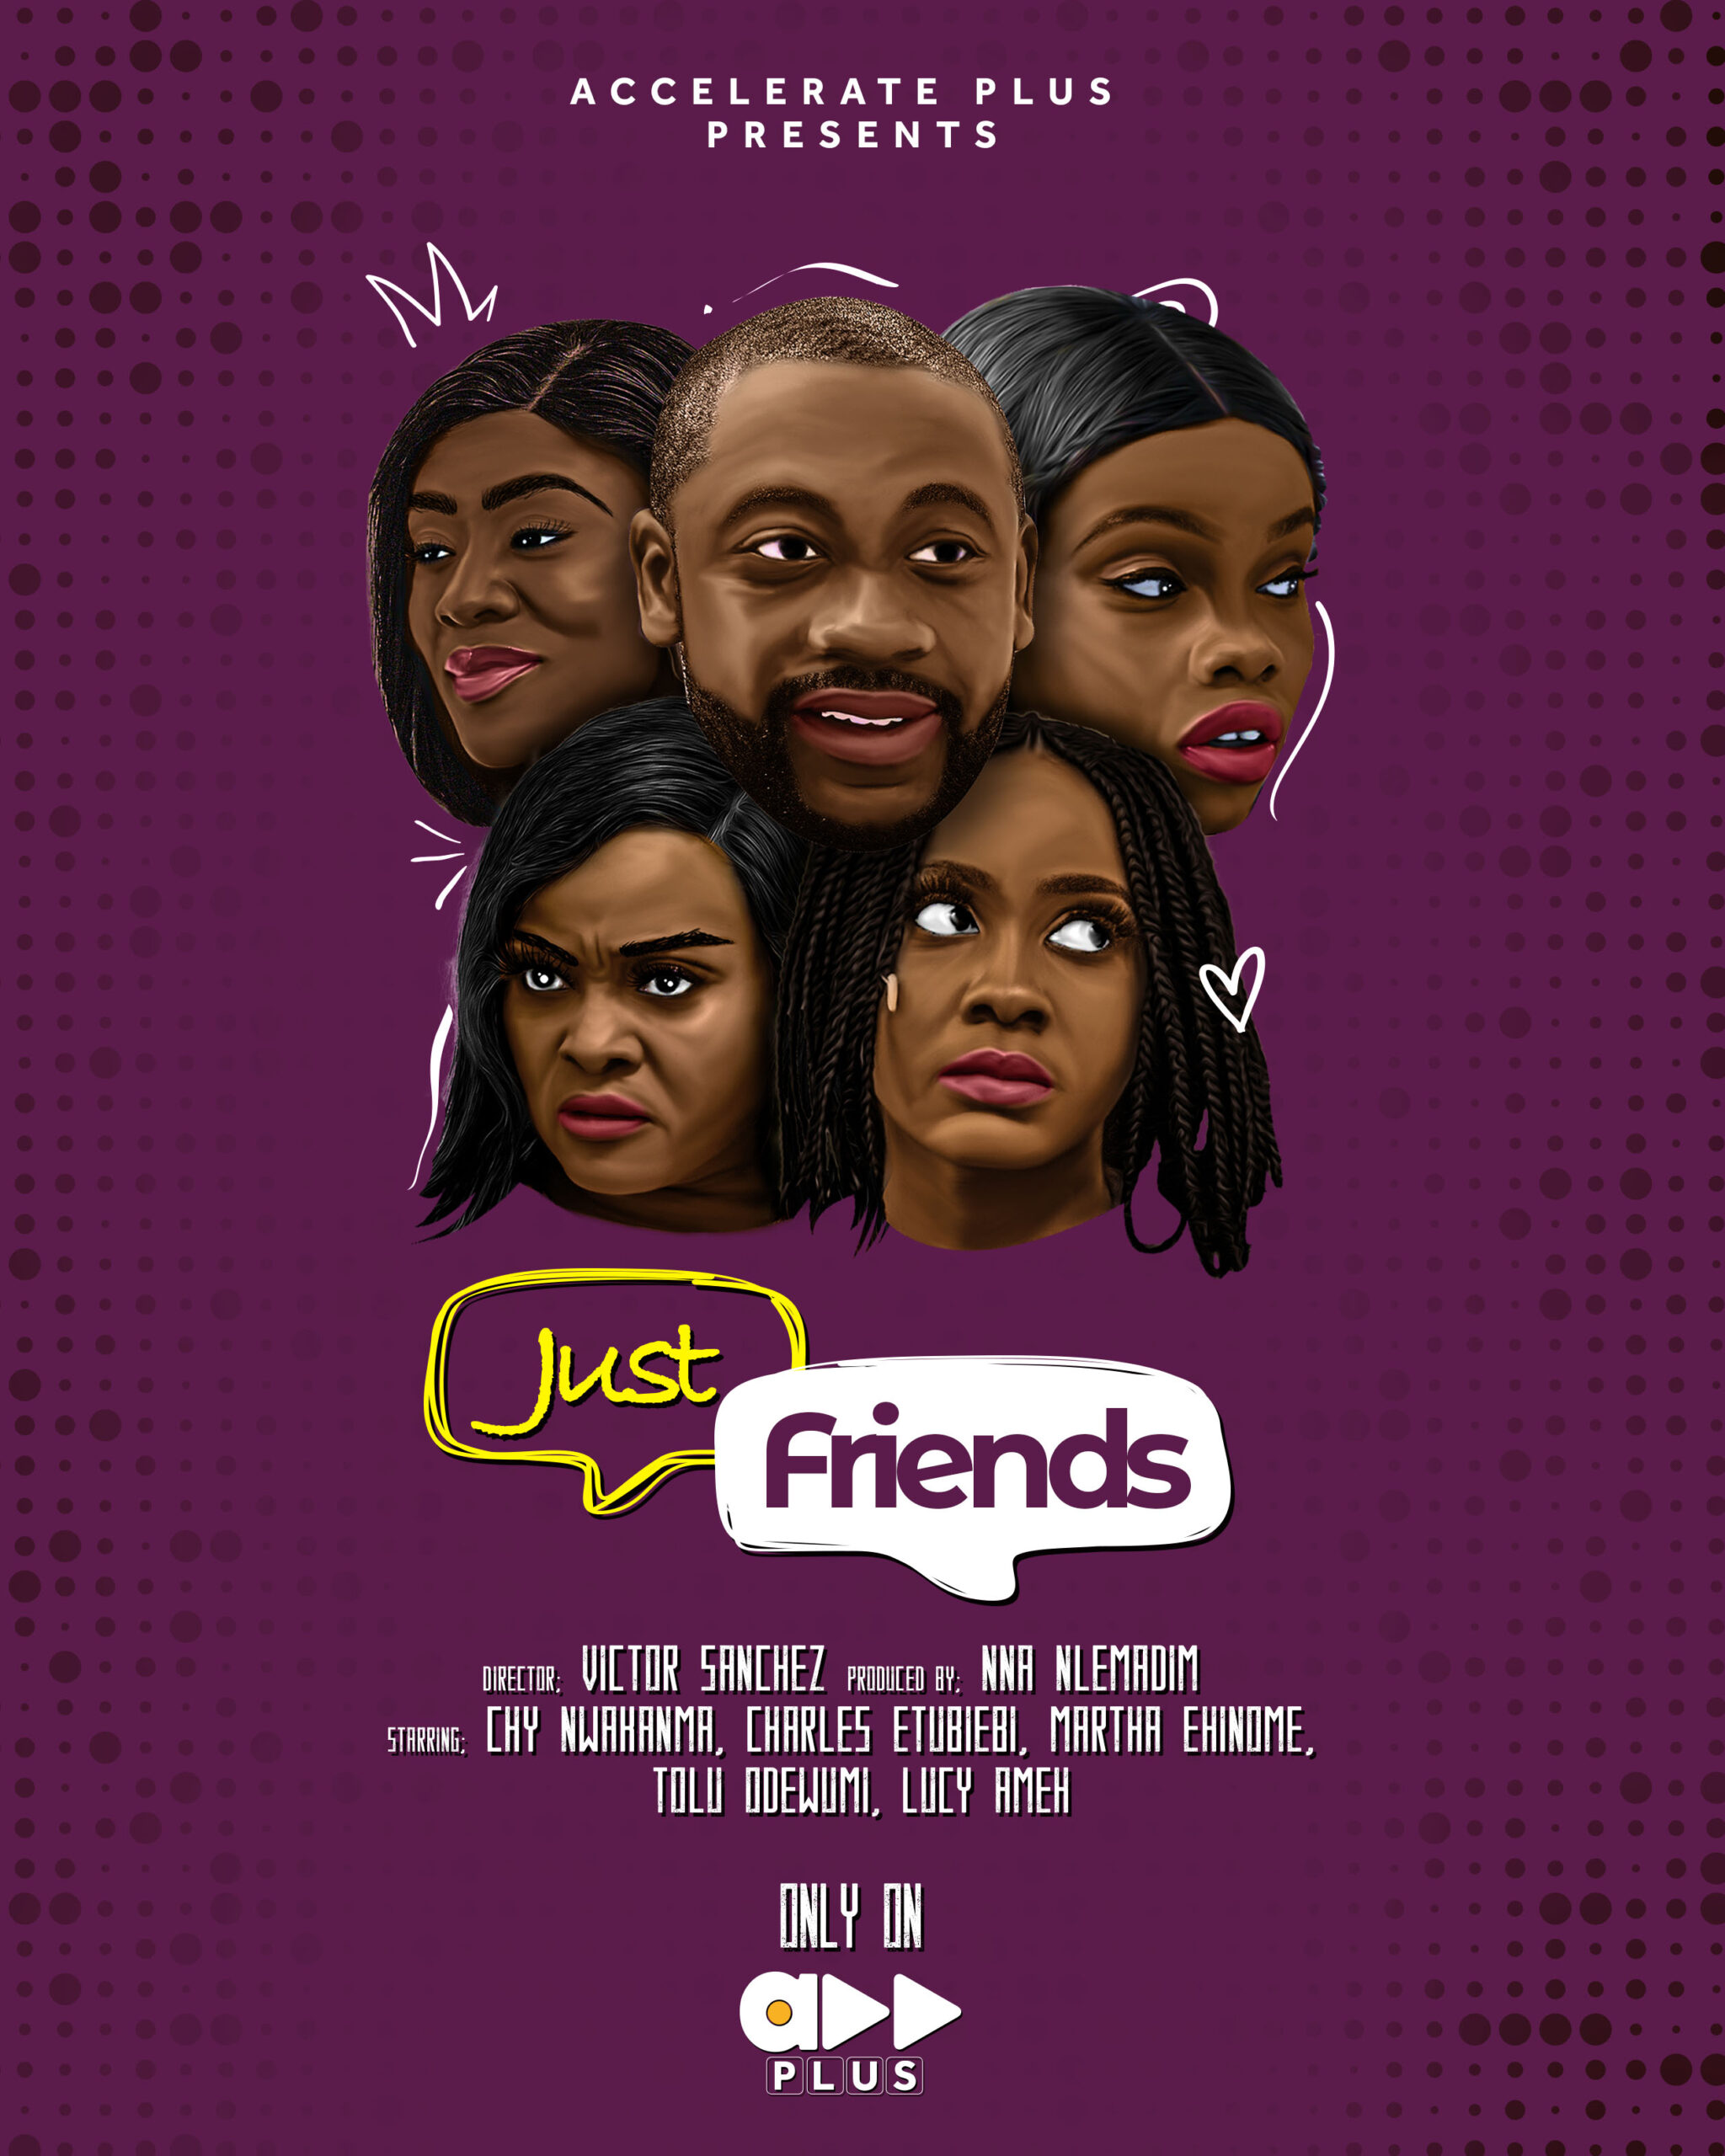 Accelerate Plus brings a New Comedy Drama Series to your Screens Titled  'Just Friends